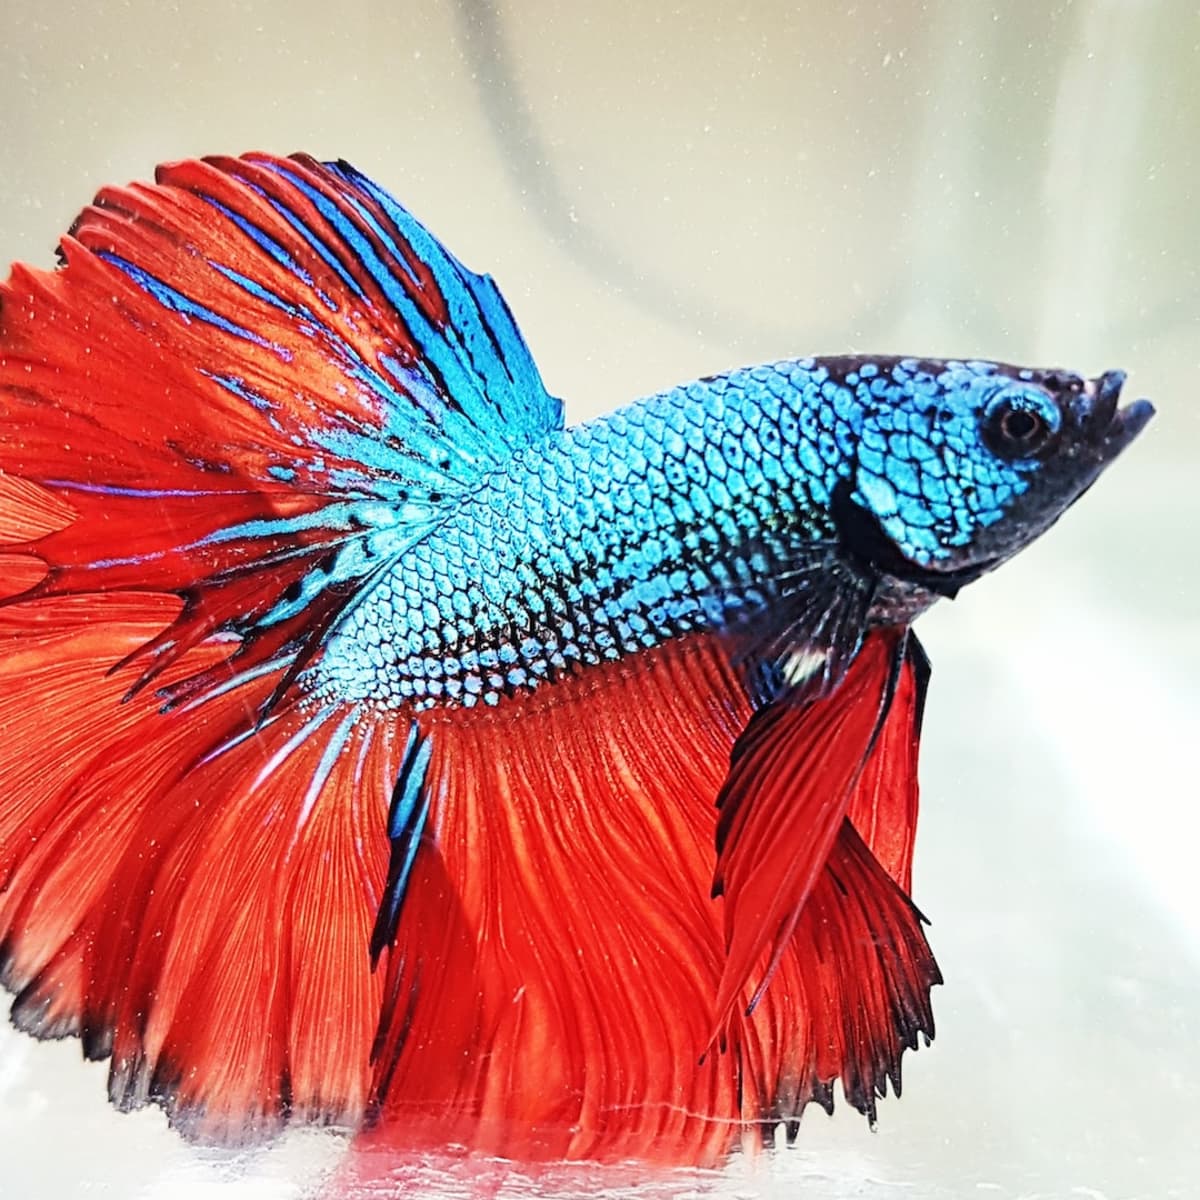 Should You Rescue Betta Fish From Stores? - PetHelpful